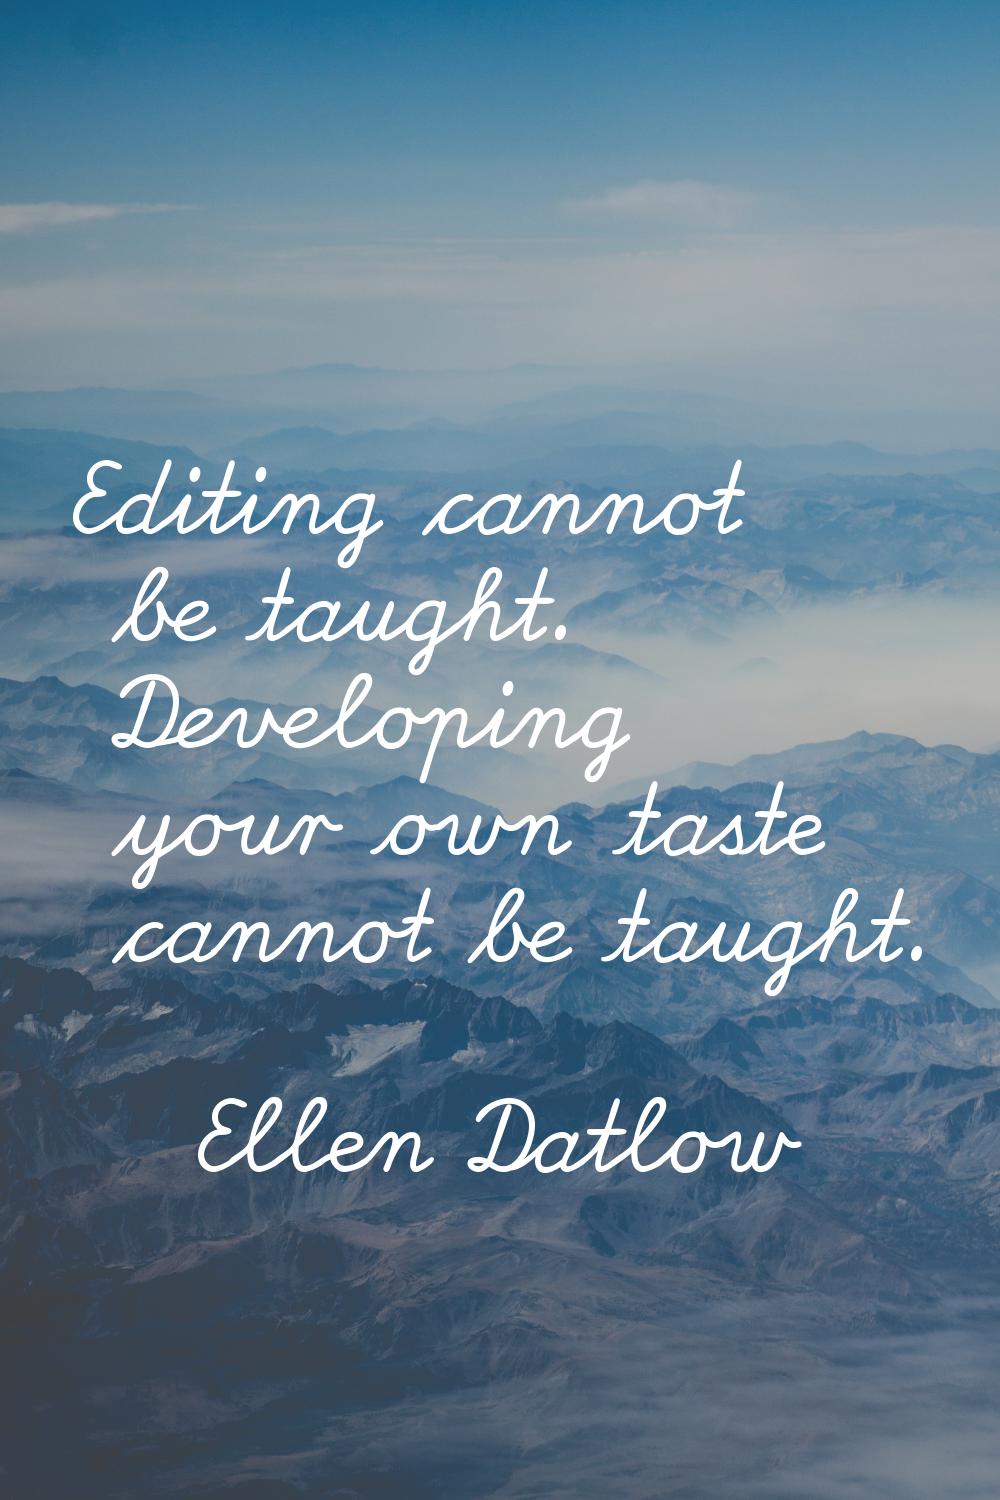 Editing cannot be taught. Developing your own taste cannot be taught.